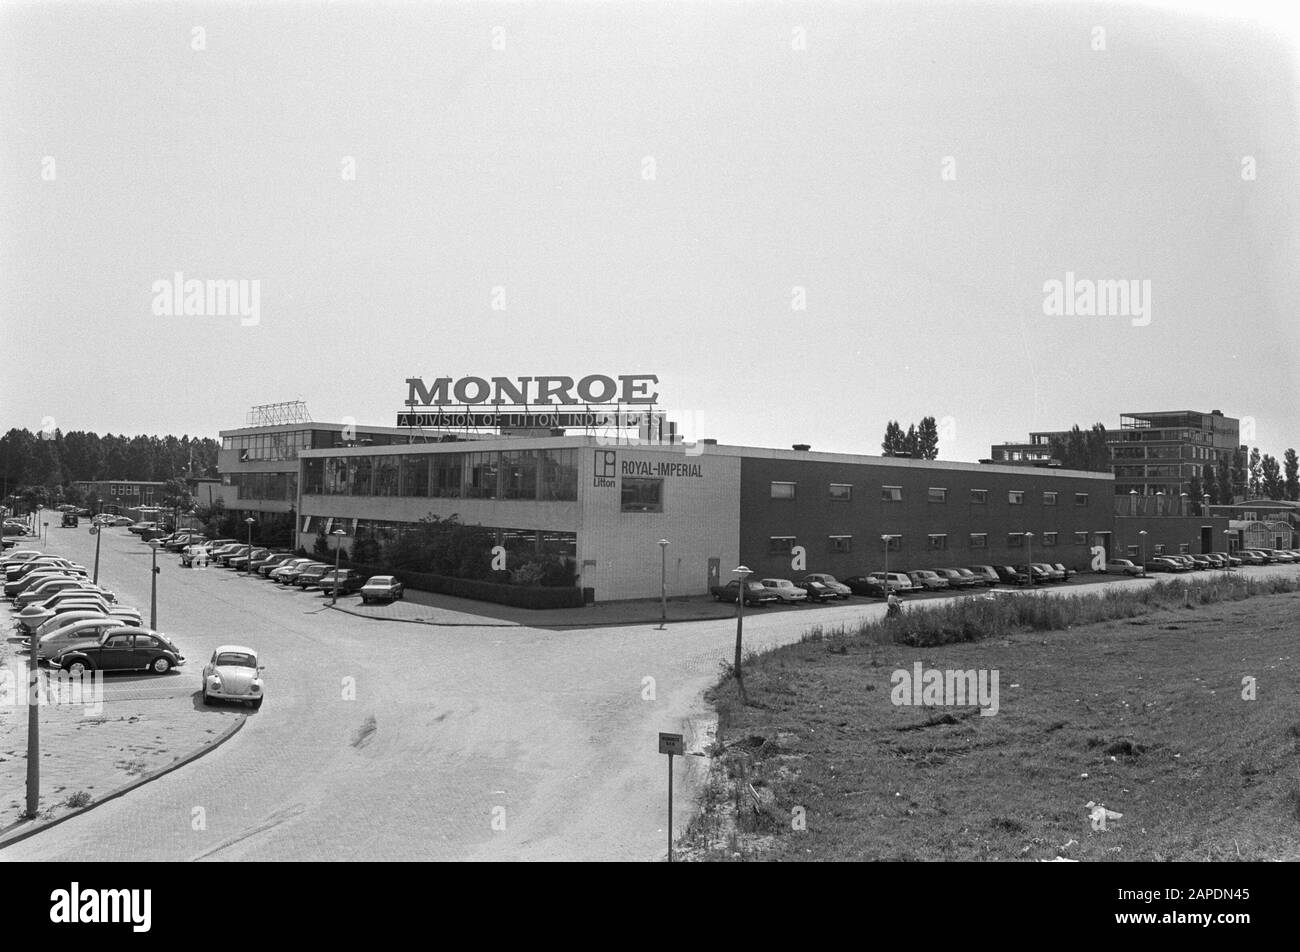 American typewriter factory Monroe Int. in Amsterdam is closing; company overview Date: 16 August 1974 Location: Amsterdam, Noord-Holland Keywords: factories, buildings, Closures Personal name: Monroe Stock Photo